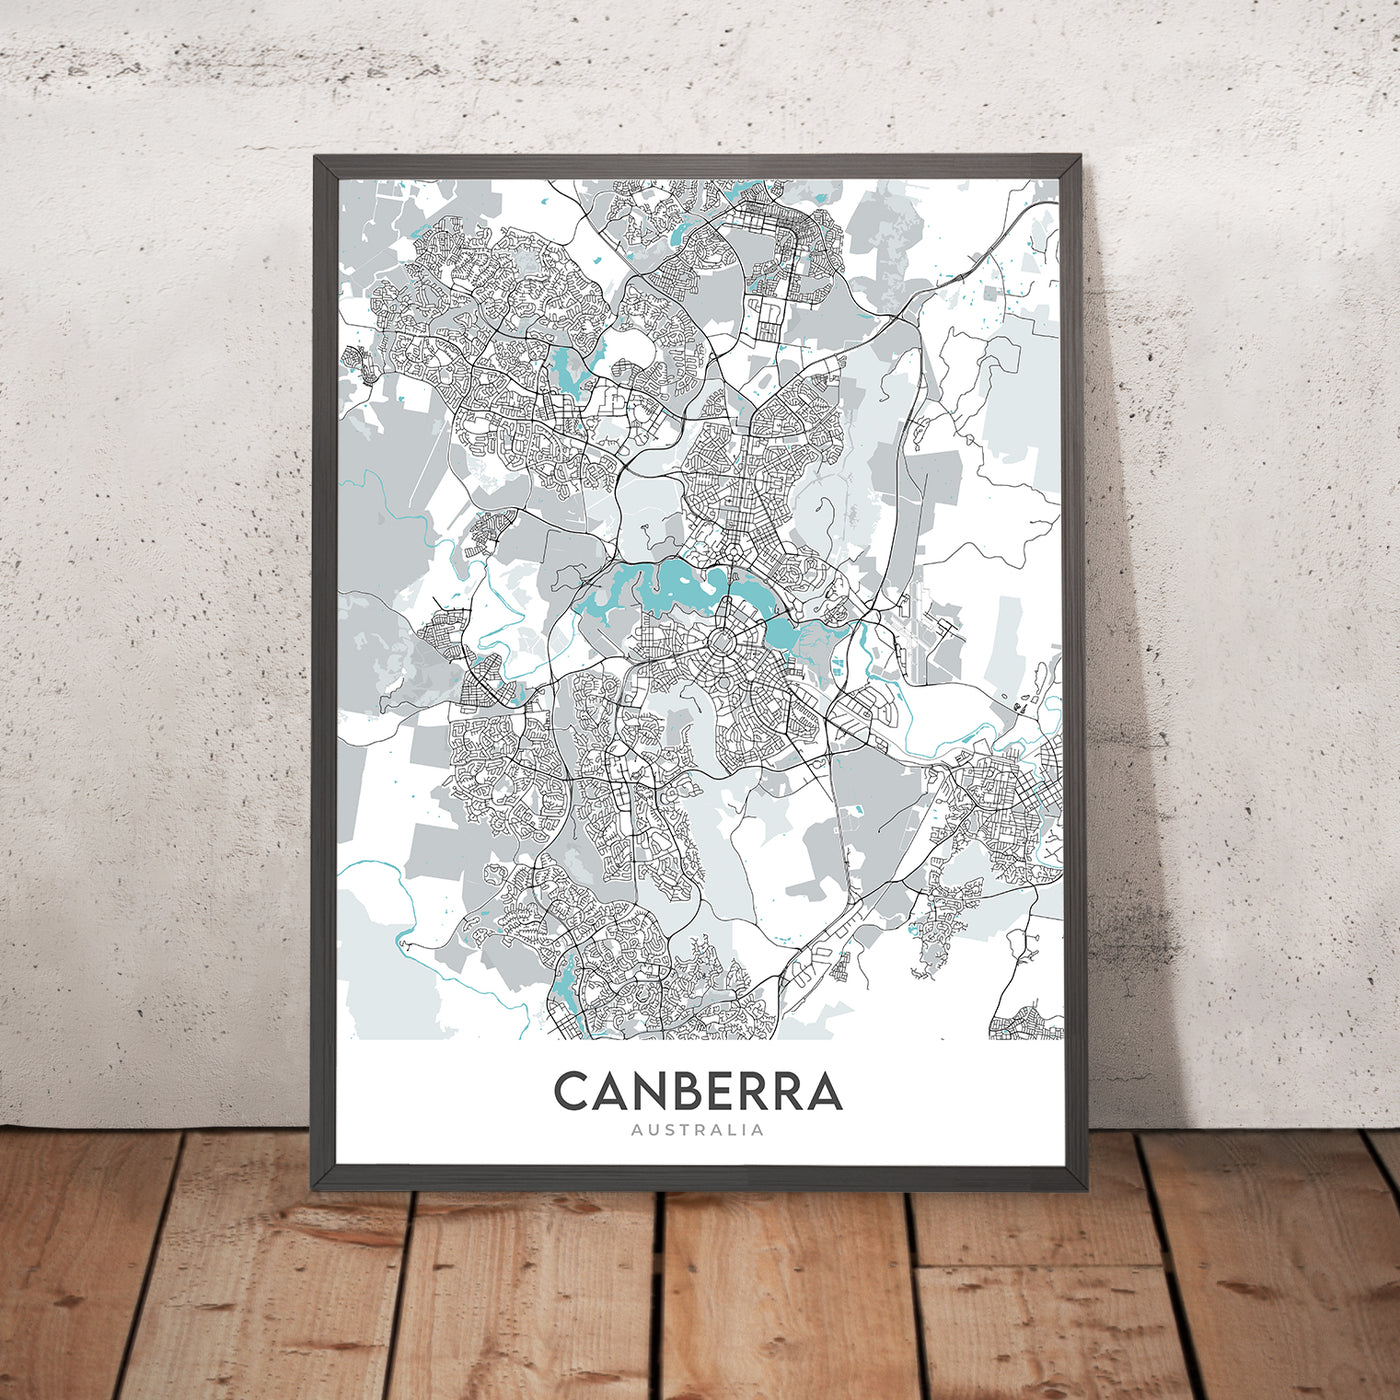 Modern City Map of Canberra, Australia: War Memorial, National Gallery, Lake Burley Griffin, Civic, Parkes Way